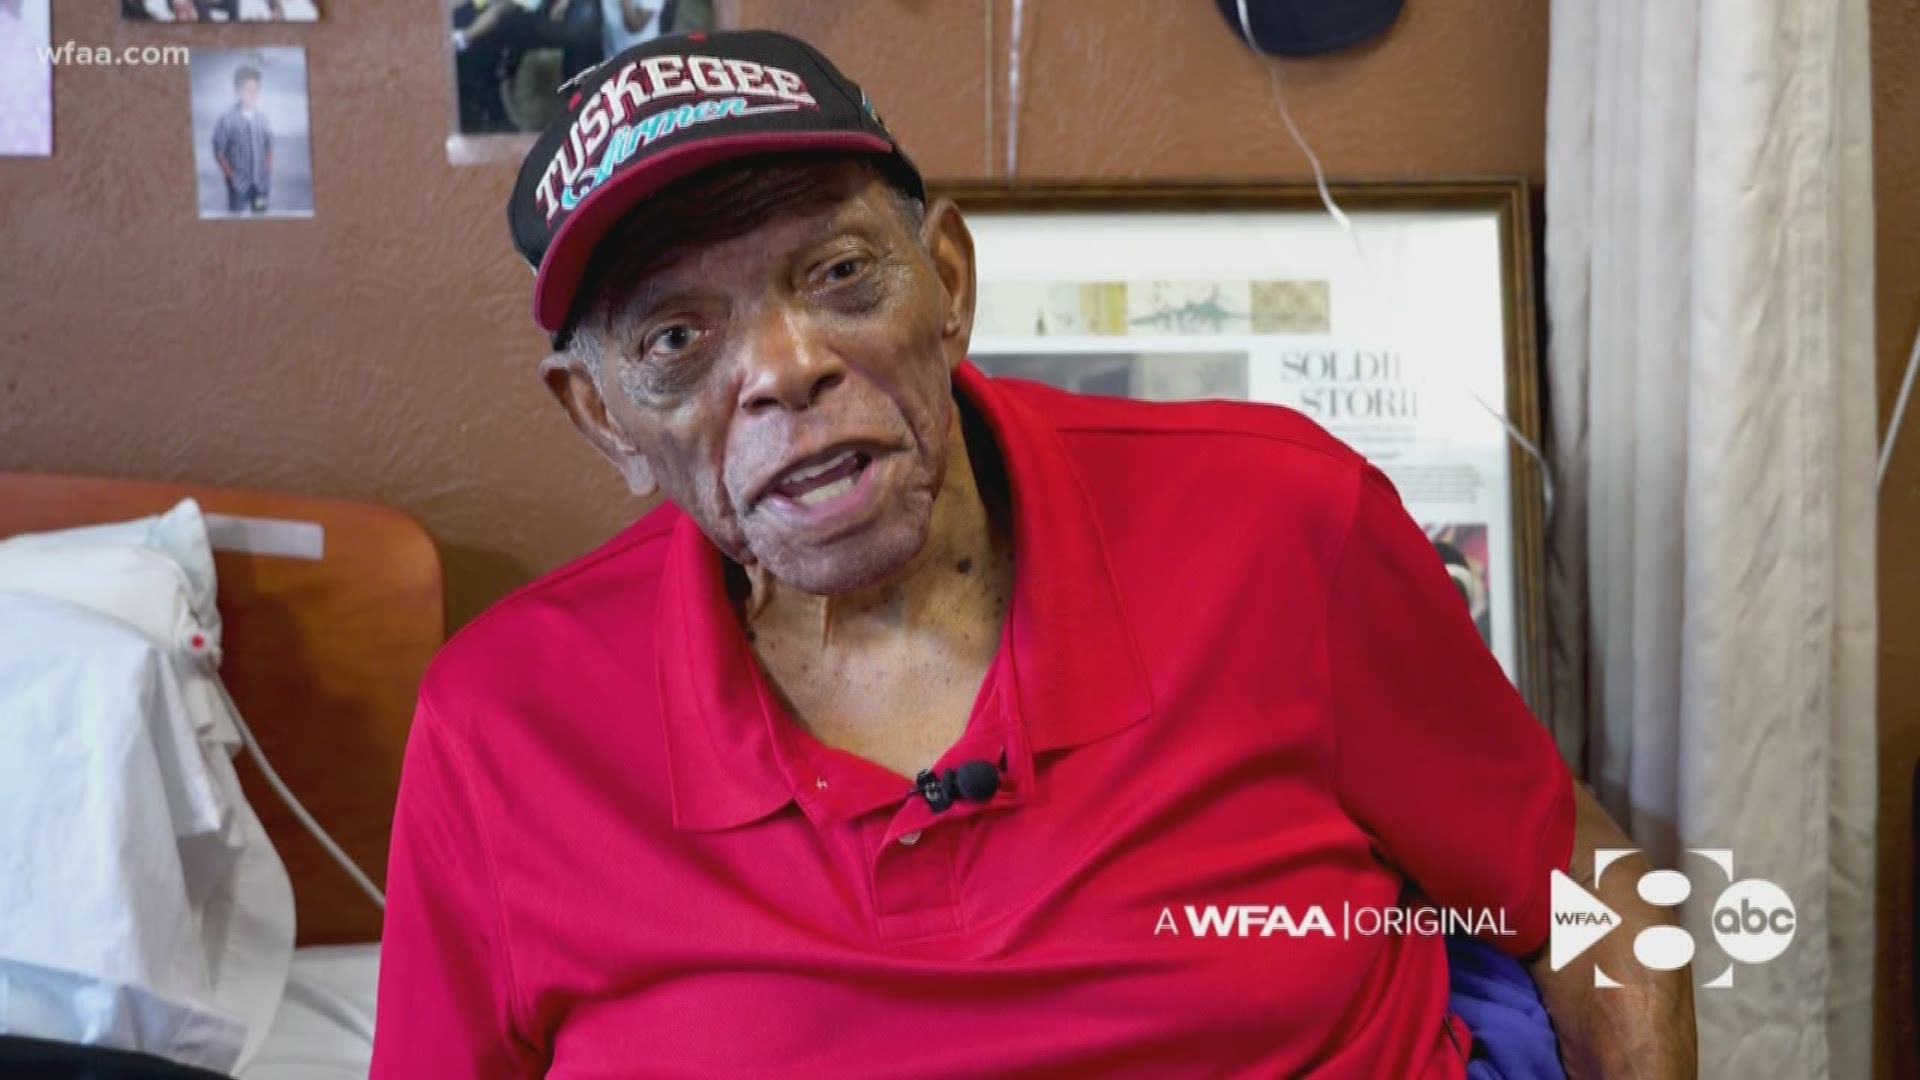 He made history and survived WWII with honors, but now he needs help to return to his own home.